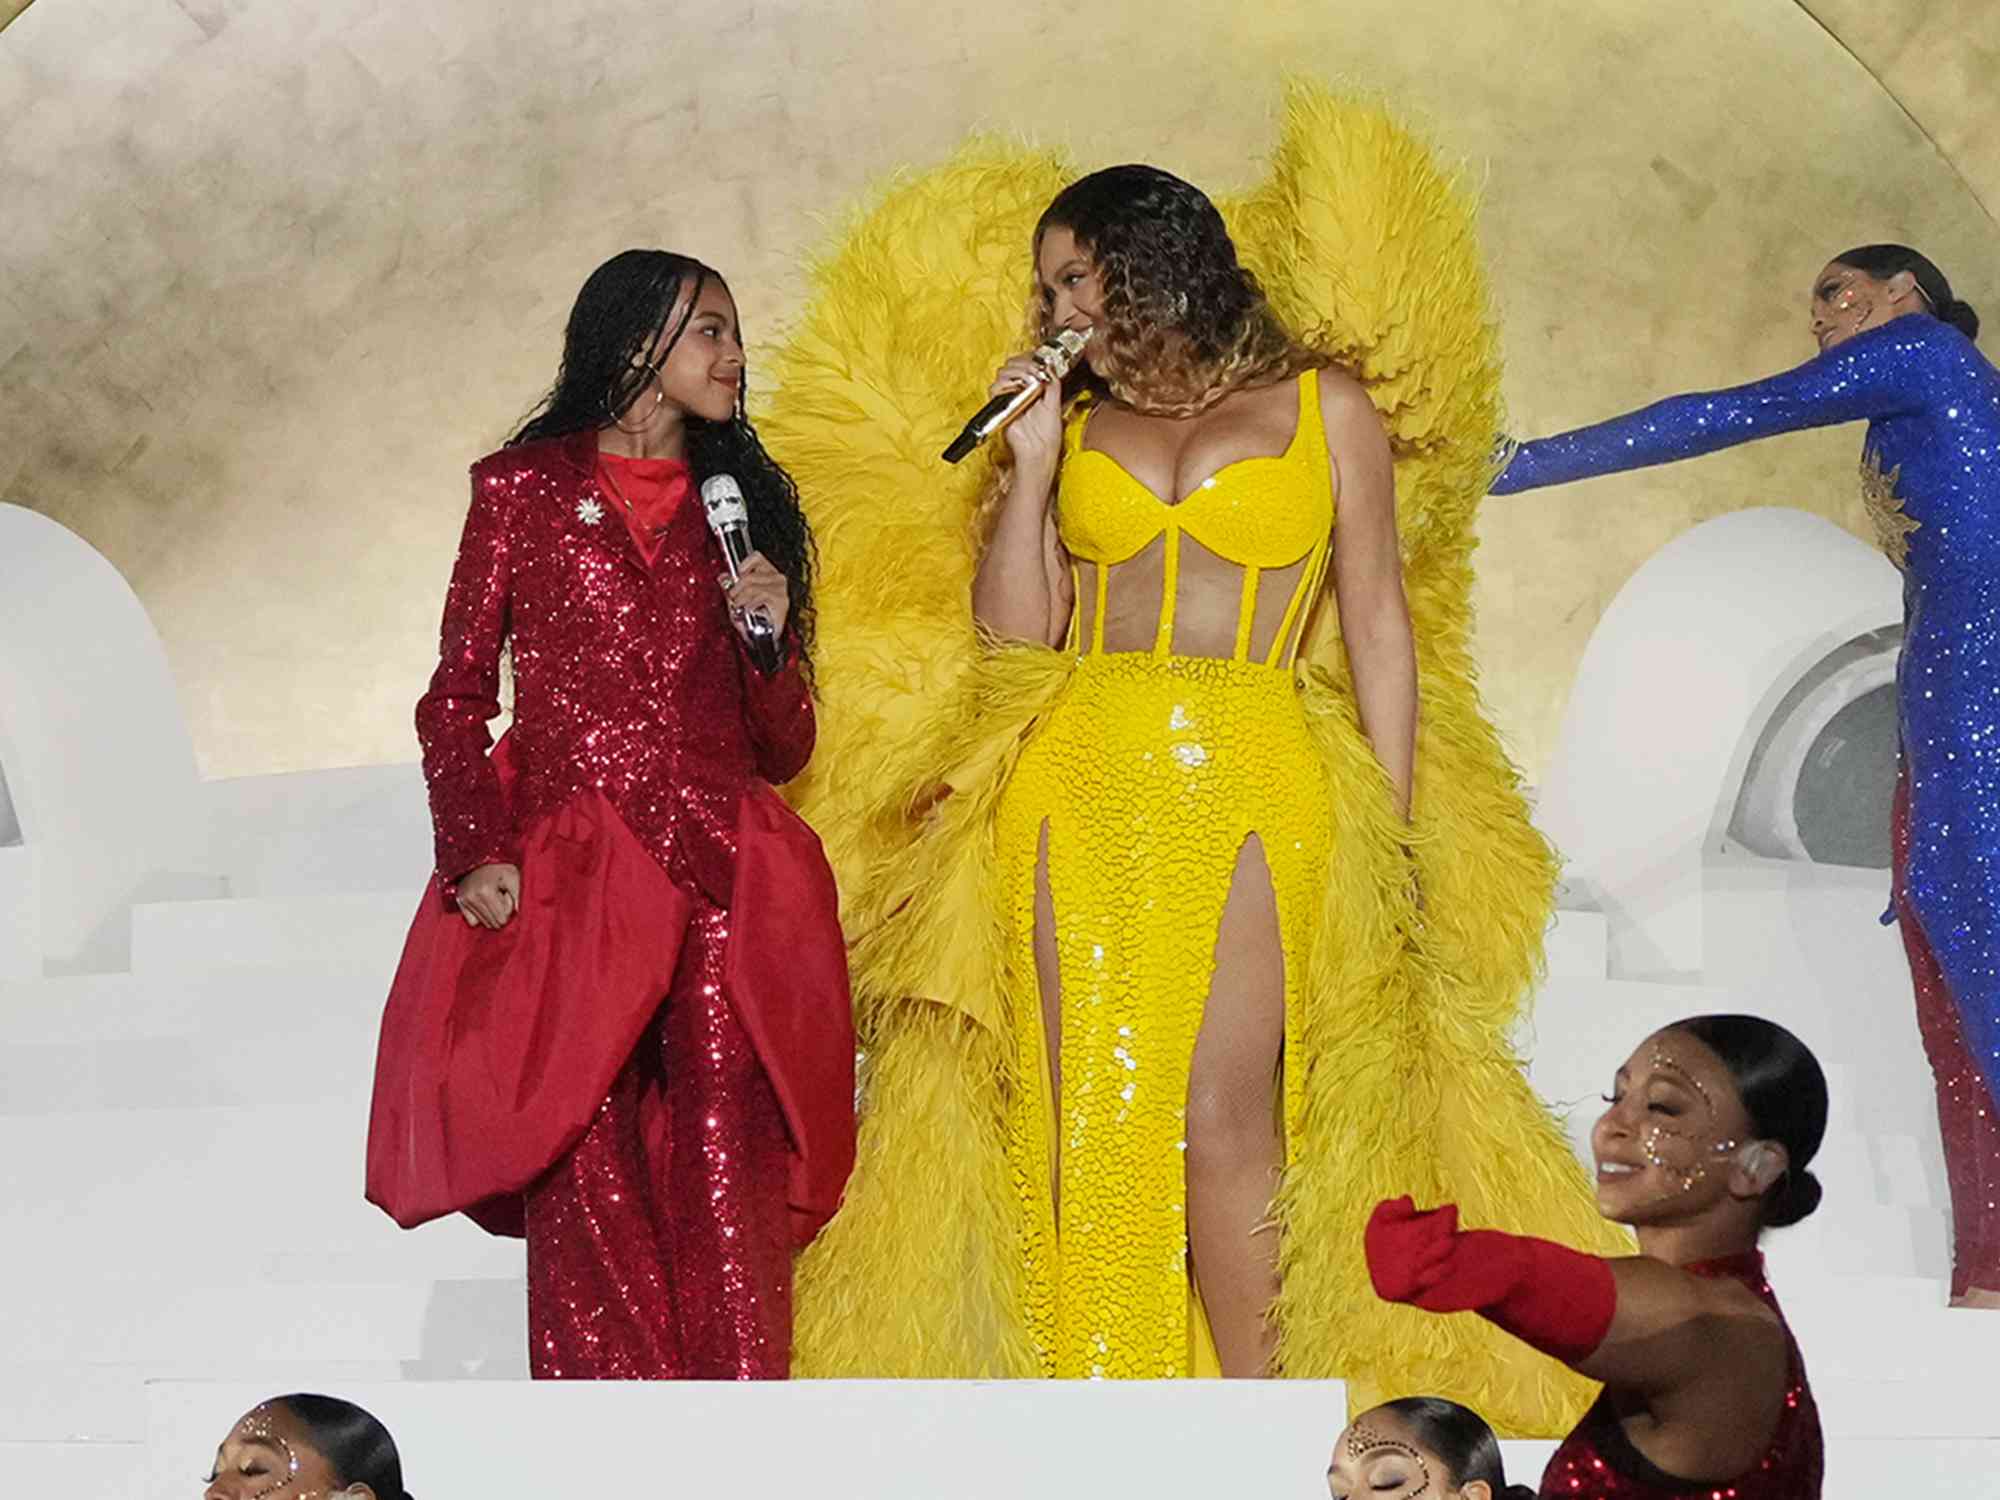 Beyonce and daughter Blue Ivy Carter perform on stage headlining the Grand Reveal of Dubai's newest luxury hotel, Atlantis The Royal 